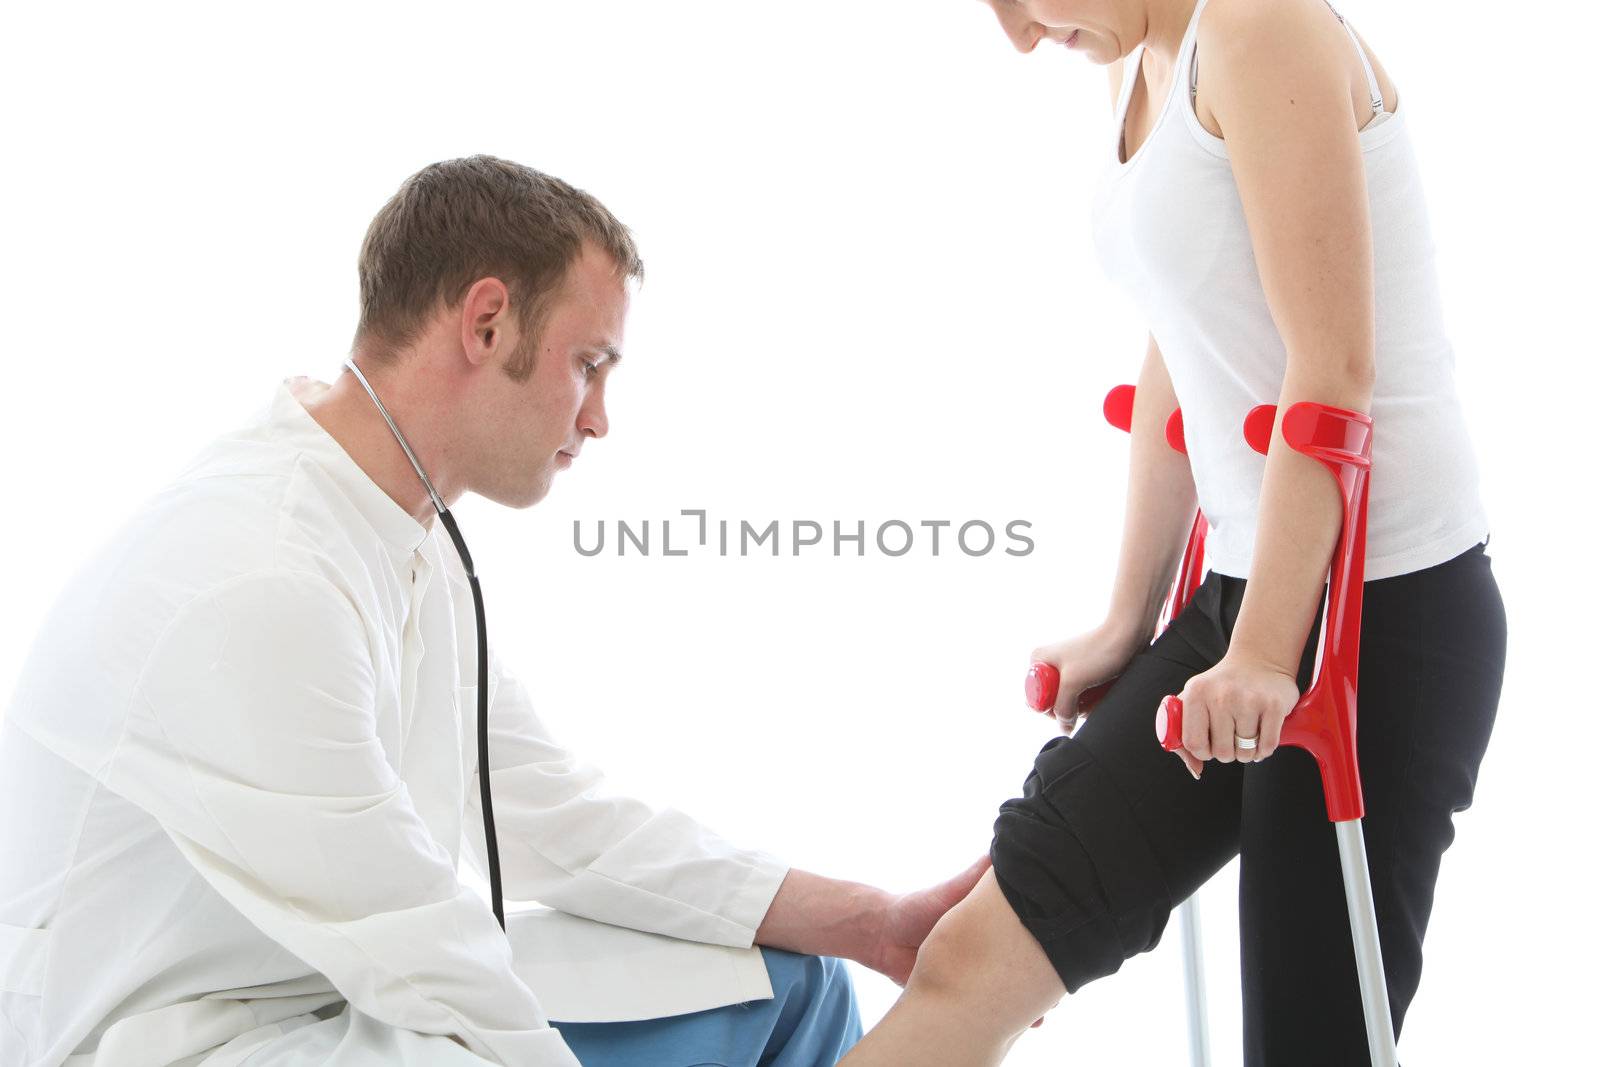 Orthopaedic surgeon kneeling down examining the knee joint of a female patient on crutches isolated on white